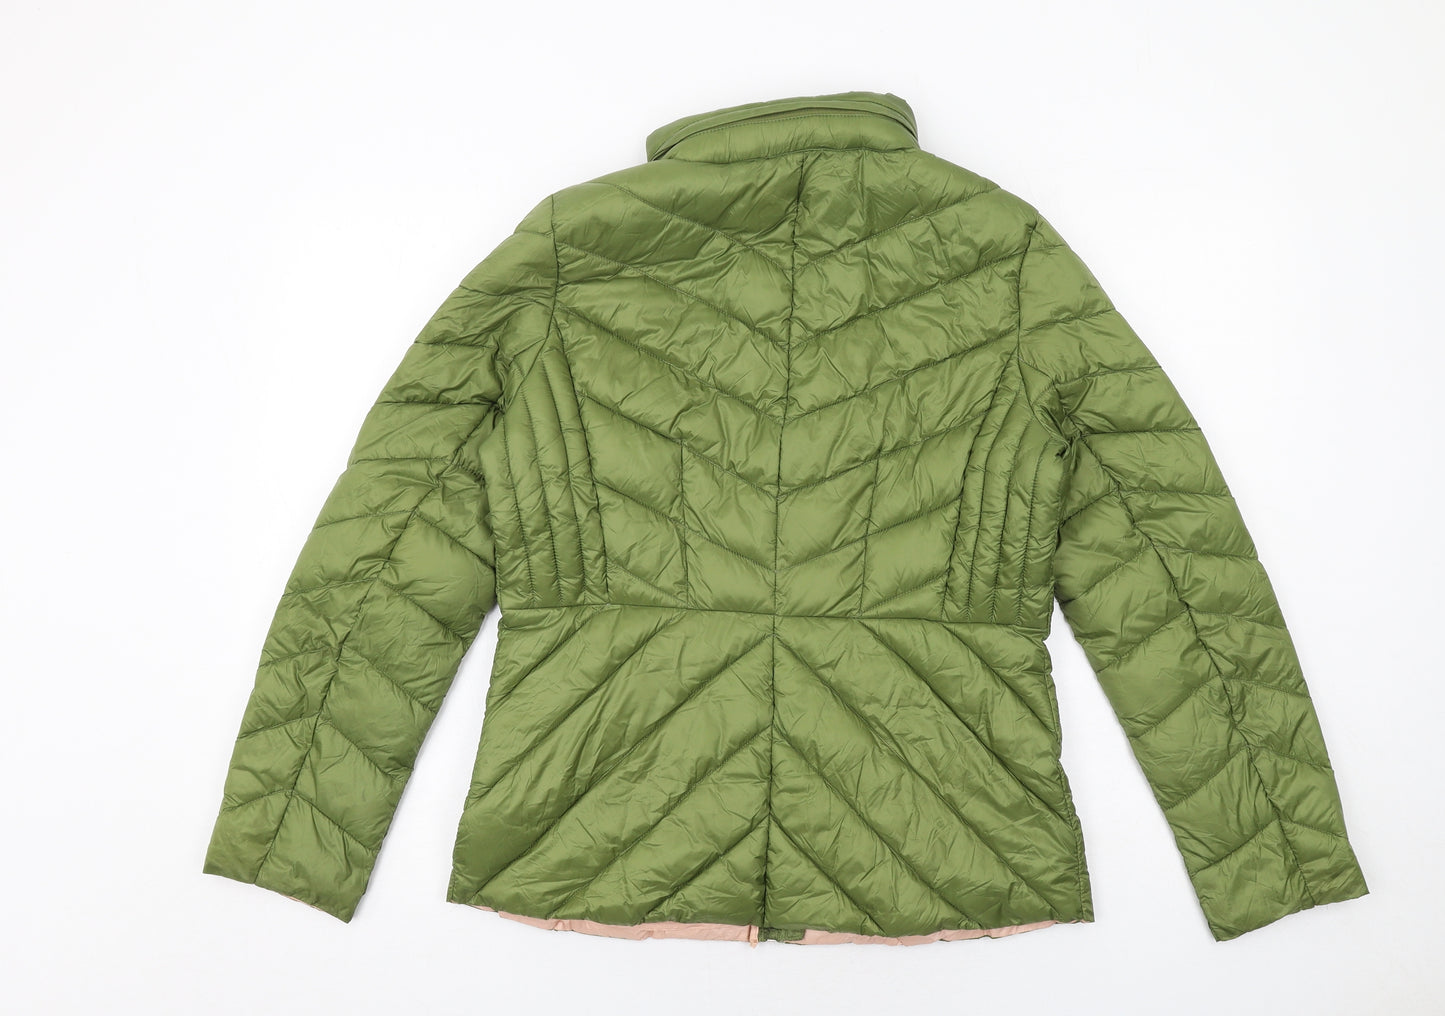 Michael Kors Womens Green Quilted Jacket Size S Zip